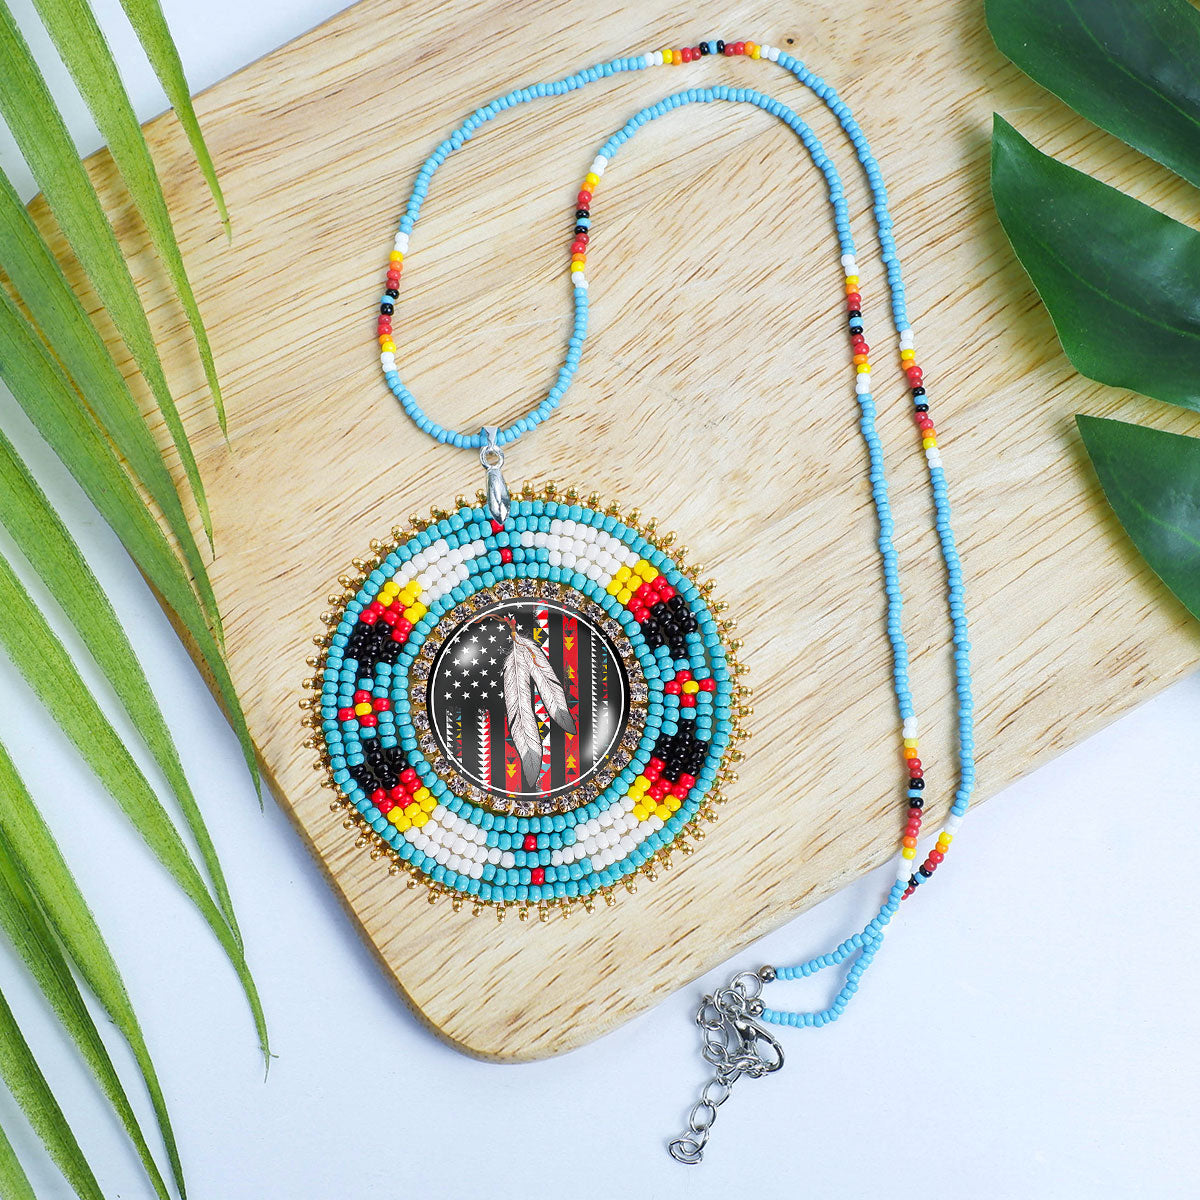 SALE 50% OFF - Native Flag Feathers Handmade Beaded Wire Necklace Pendant Unisex With Native American Style